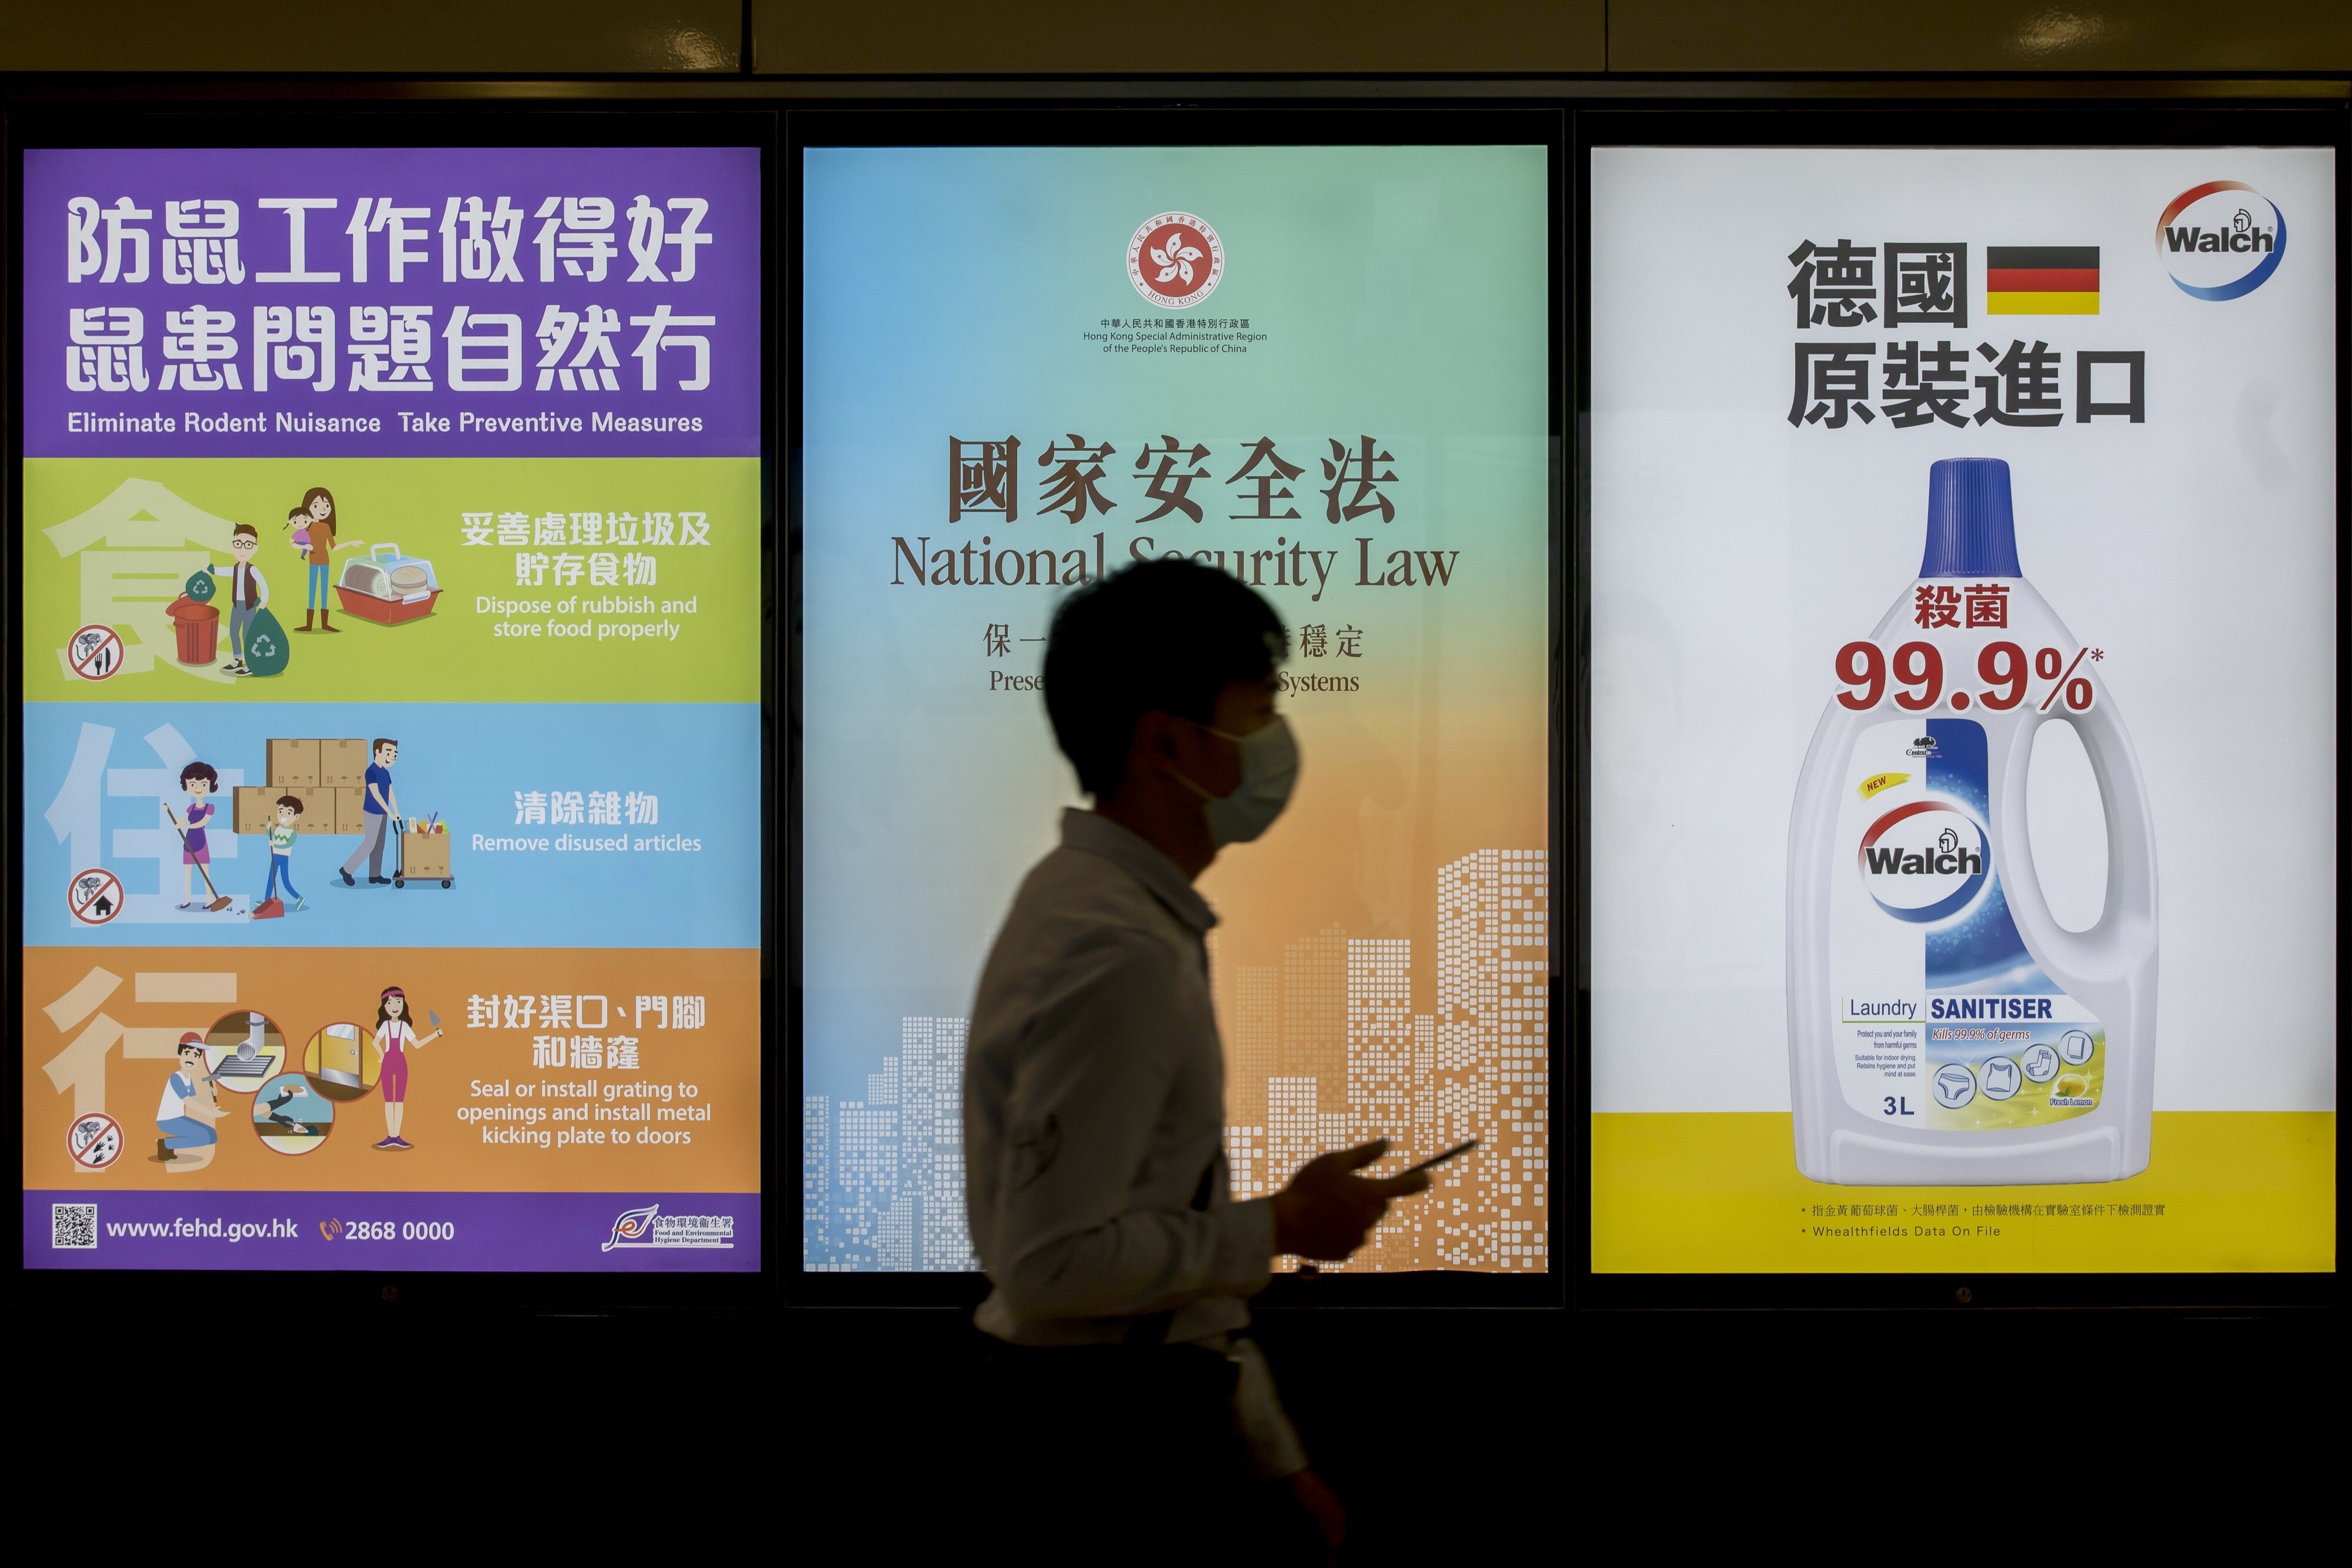 A government-sponsored advertisement promotes the national security law in Hong Kong. Photo: Bloomberg